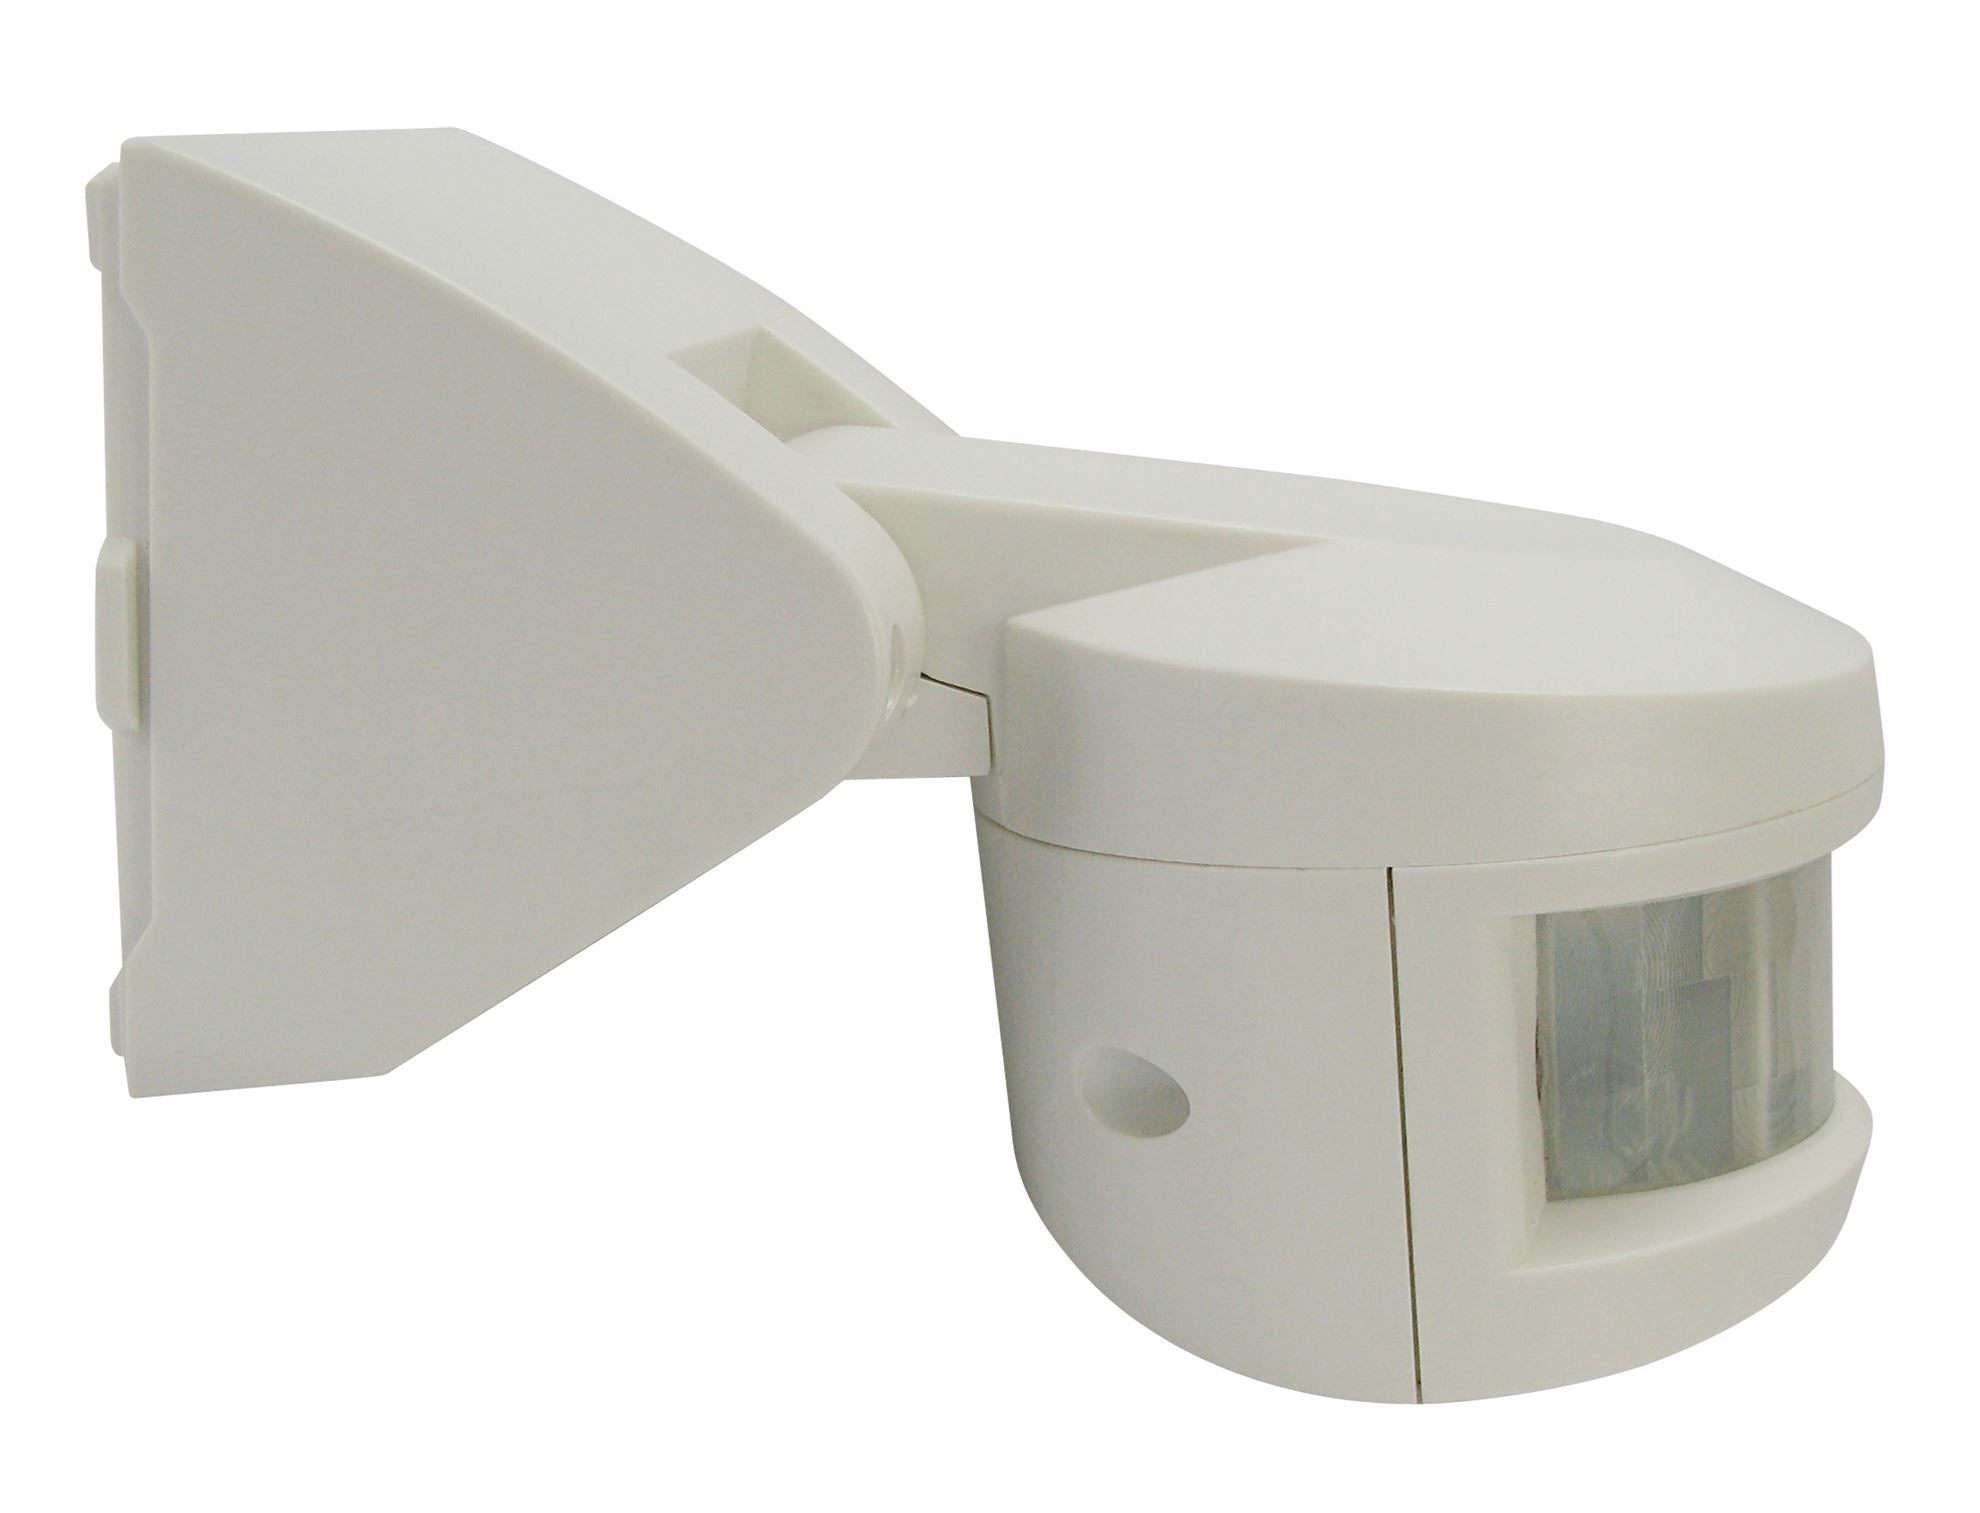 HOUSEWATCH_Outdoor_Motion_Sensor._IP65._Detection_Range_Up_to_12m._Detection_Angle_180_Degree._Auto_Off_Time_Adjustable._Wall/Ceiling_Mount._White_Colour.